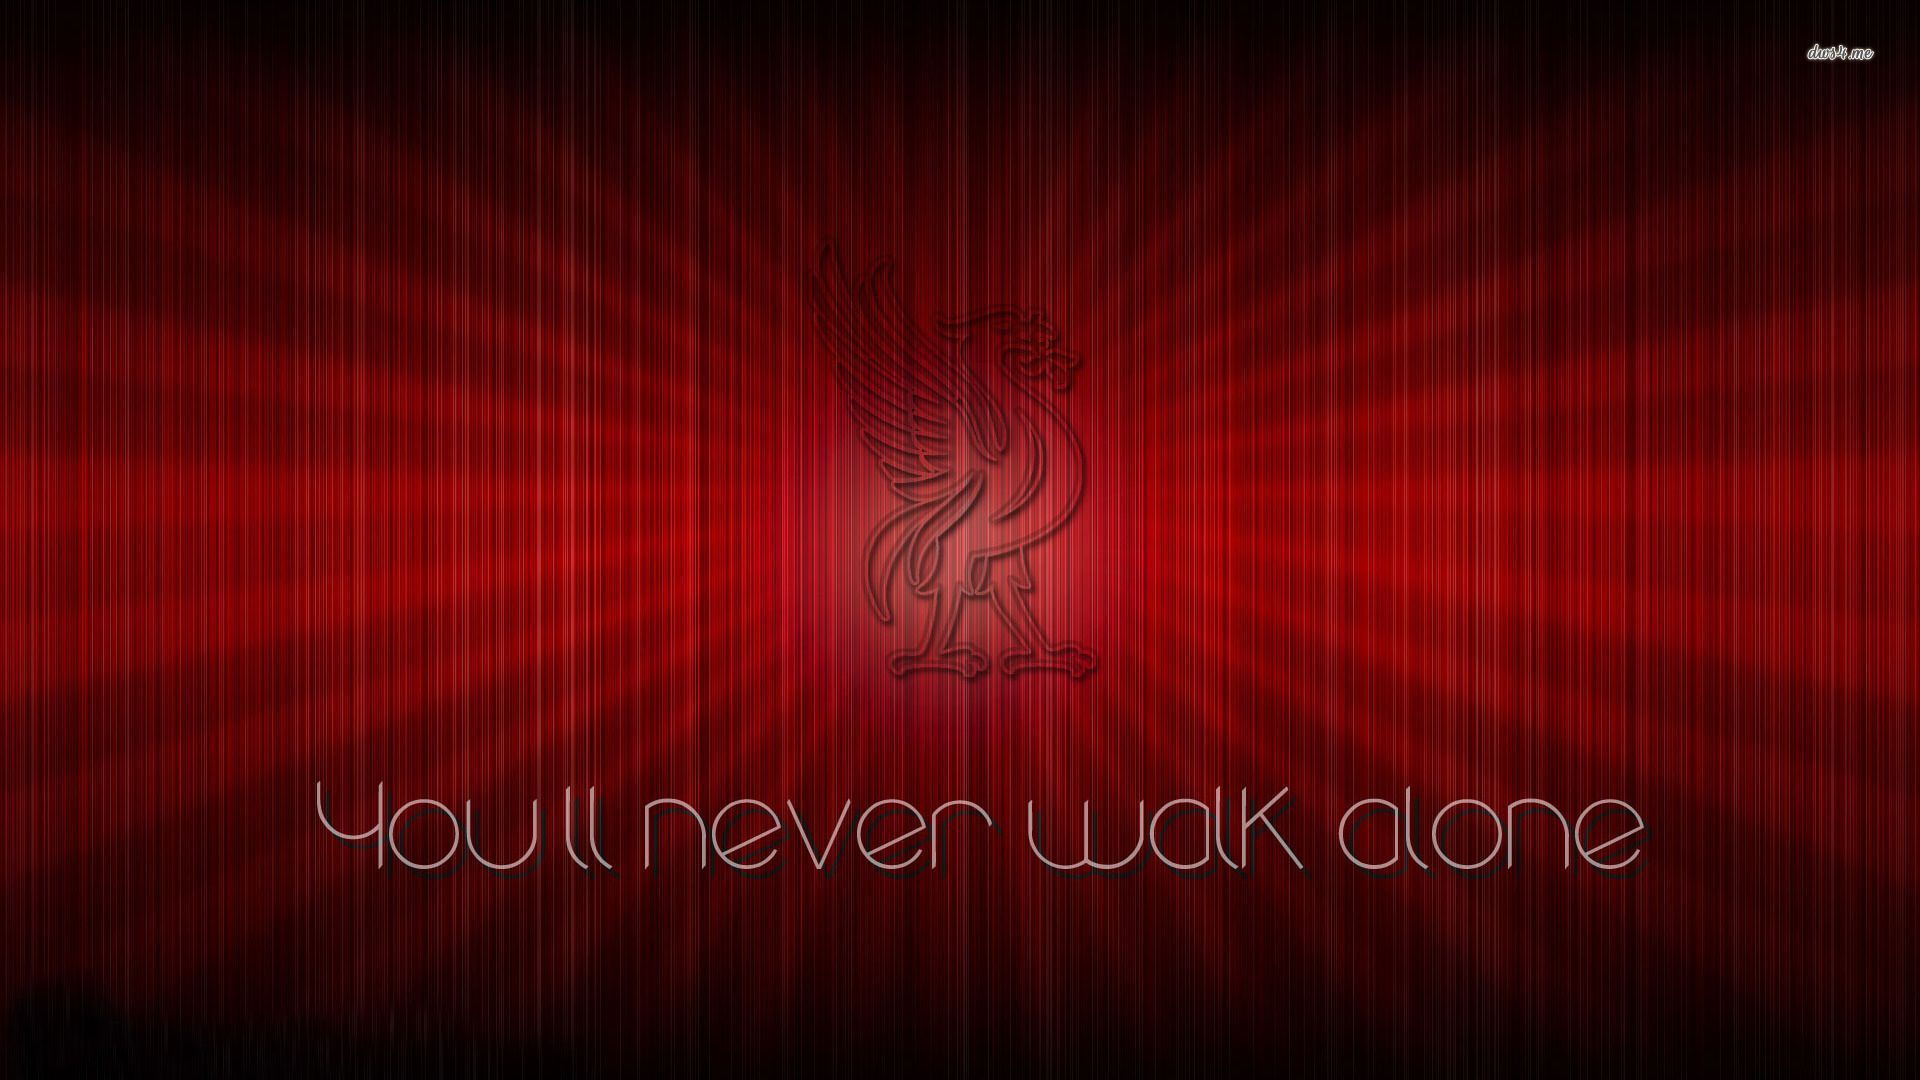 Gallery for - download wallpaper liverpool logo